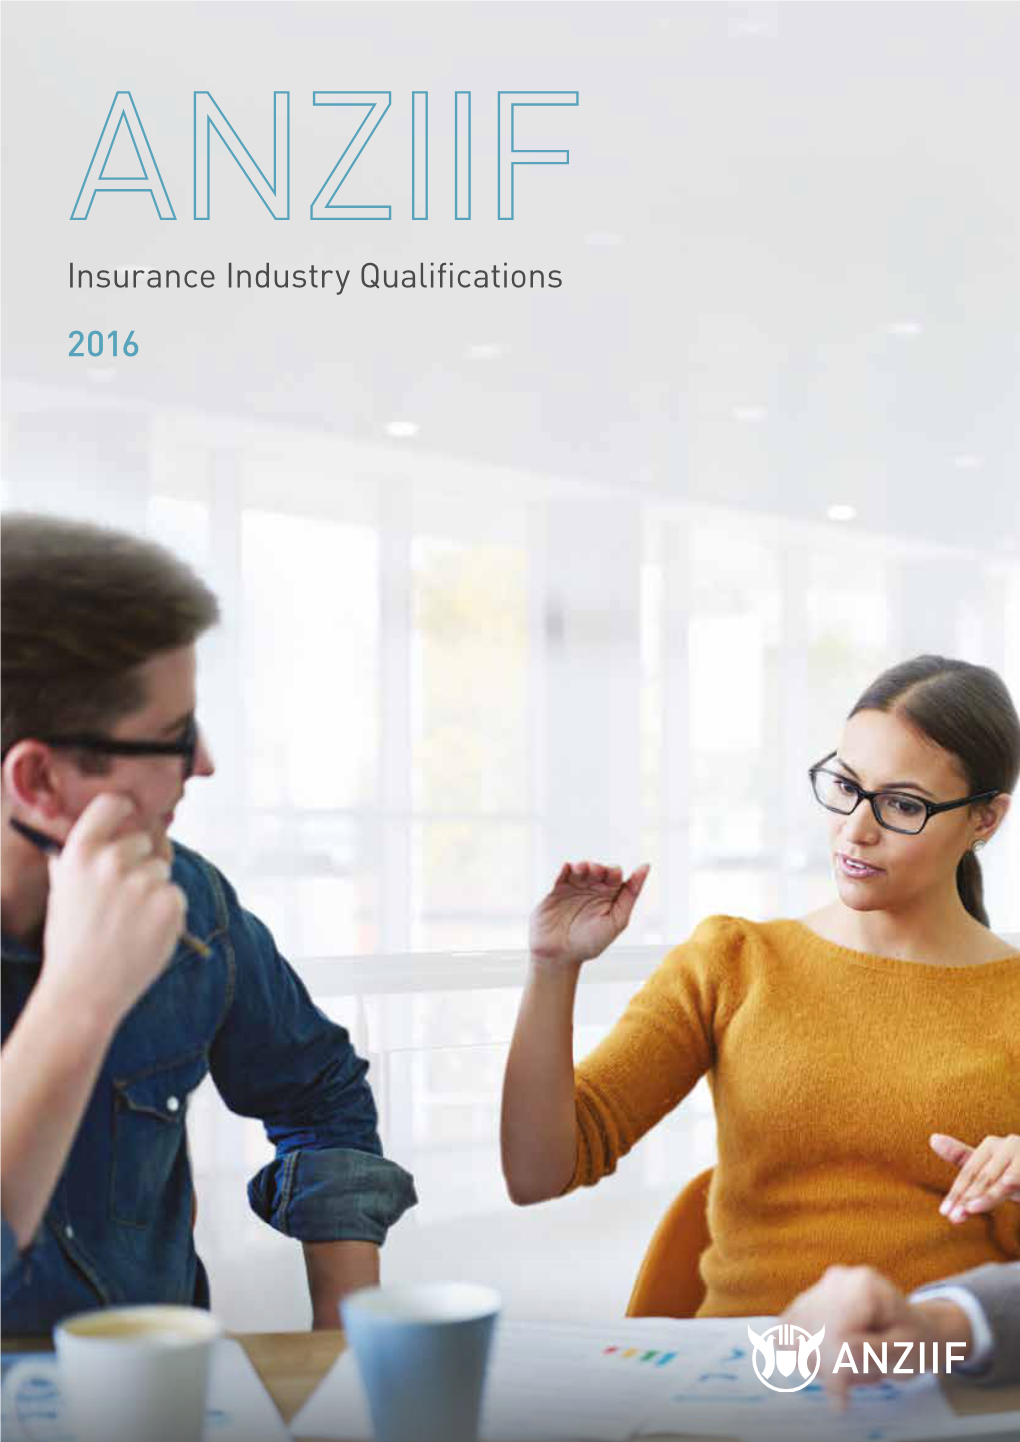 Insurance Industry Qualifications 2016